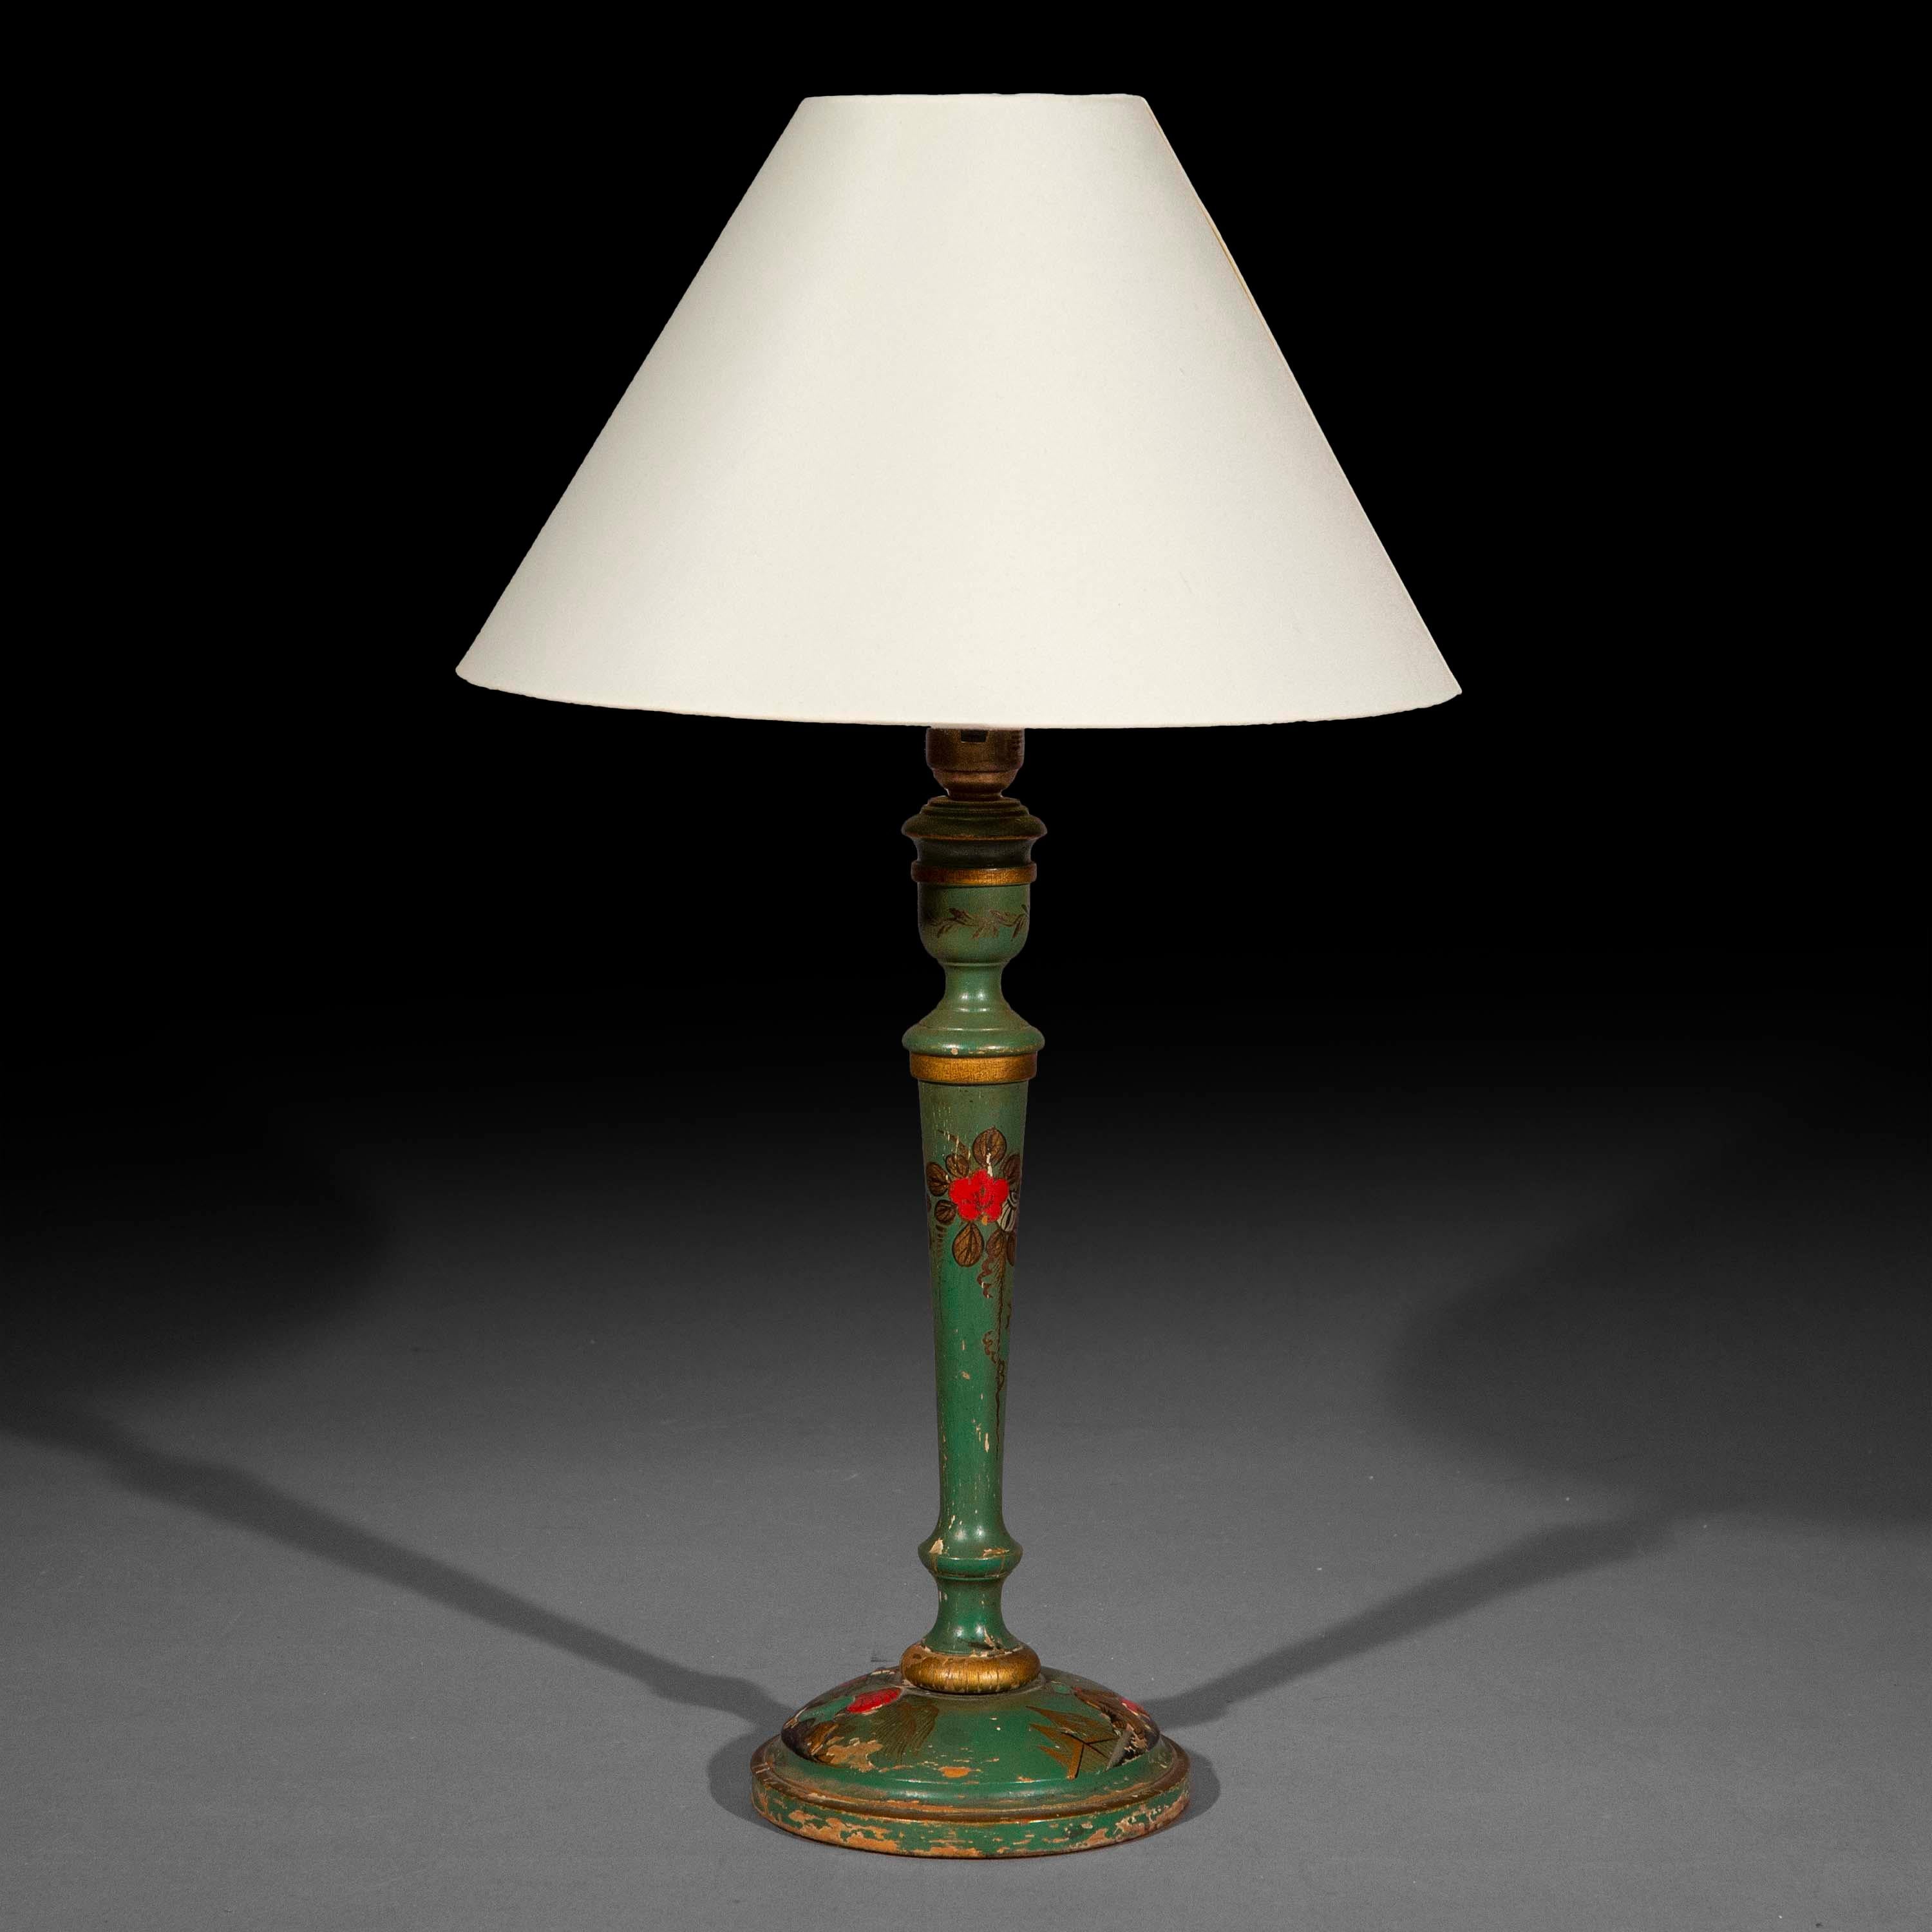 A very decorative Chinoiserie candlestick lamp, painted with oriental motifs on green ground.
Probably English, mid-20th century. Decoration distressed.

Why we like it
A very chic small lamp to add a playful accent to an eclectic